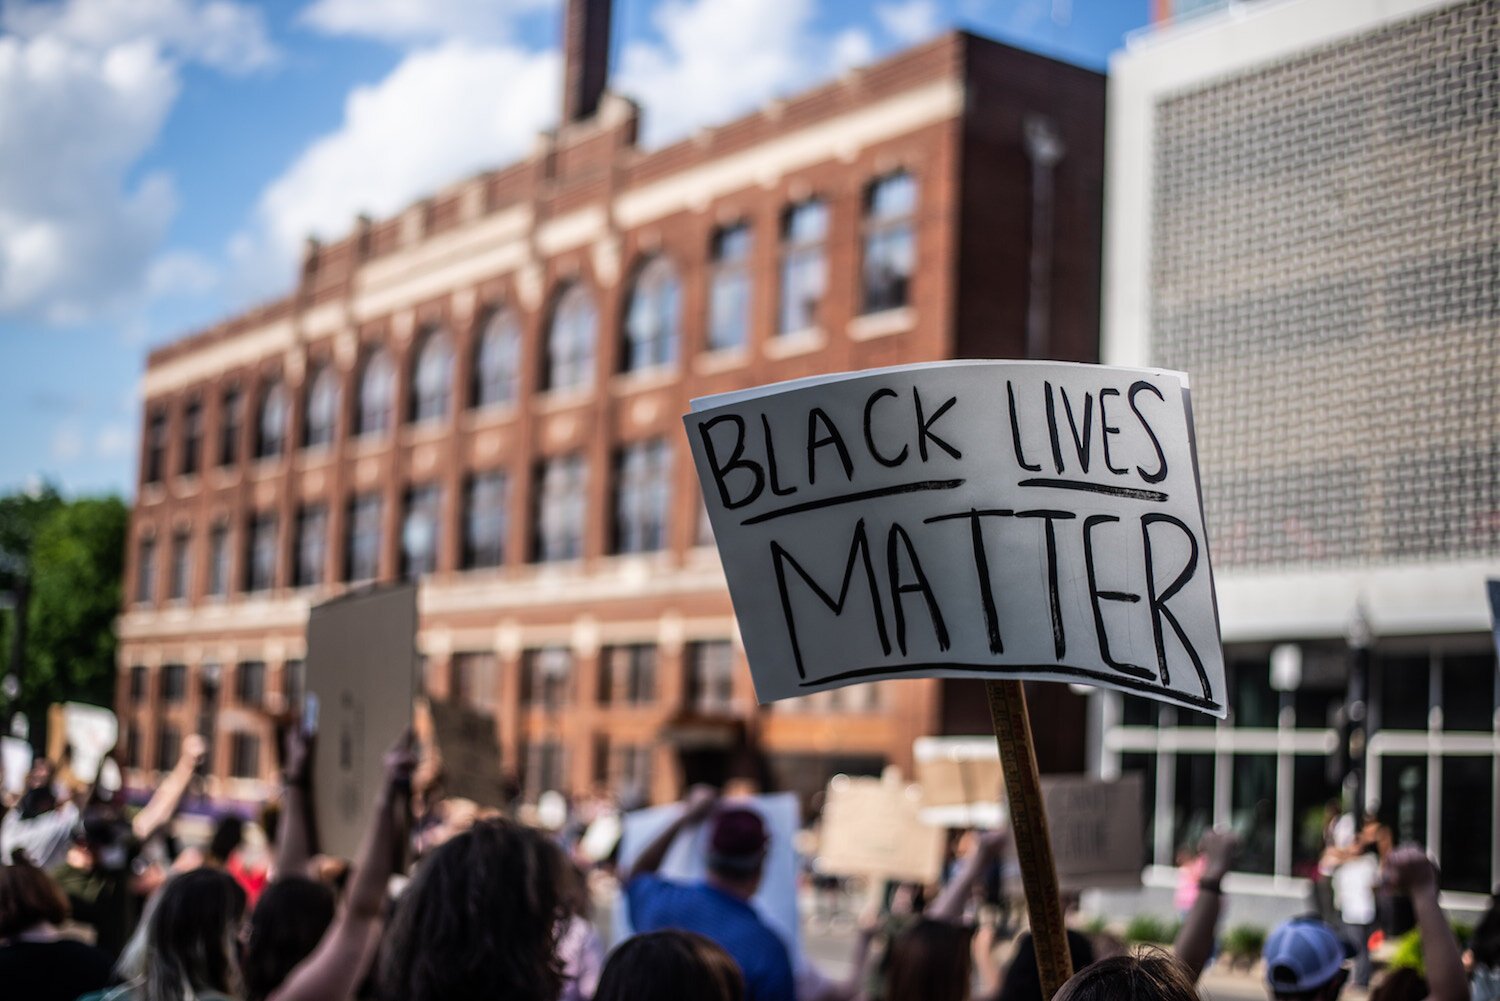 A photo from Fort Wayne's Black Lives Matter protests in 2020.